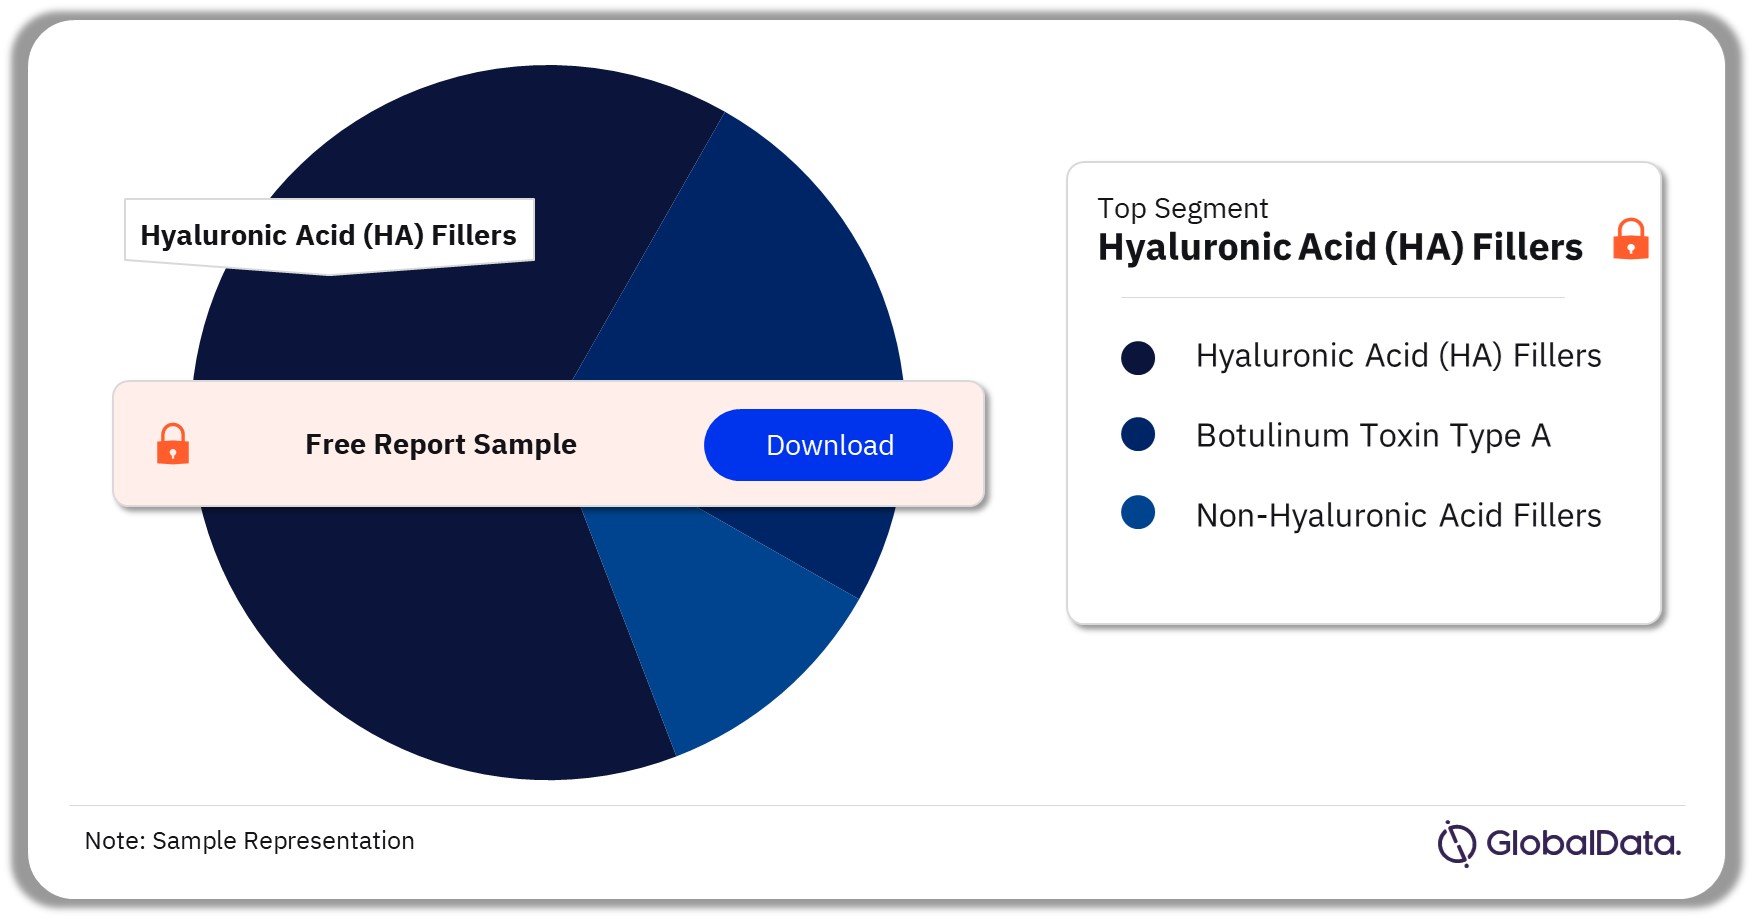 Aesthetic Injectables Market Analysis by Segments, 2023 (%)